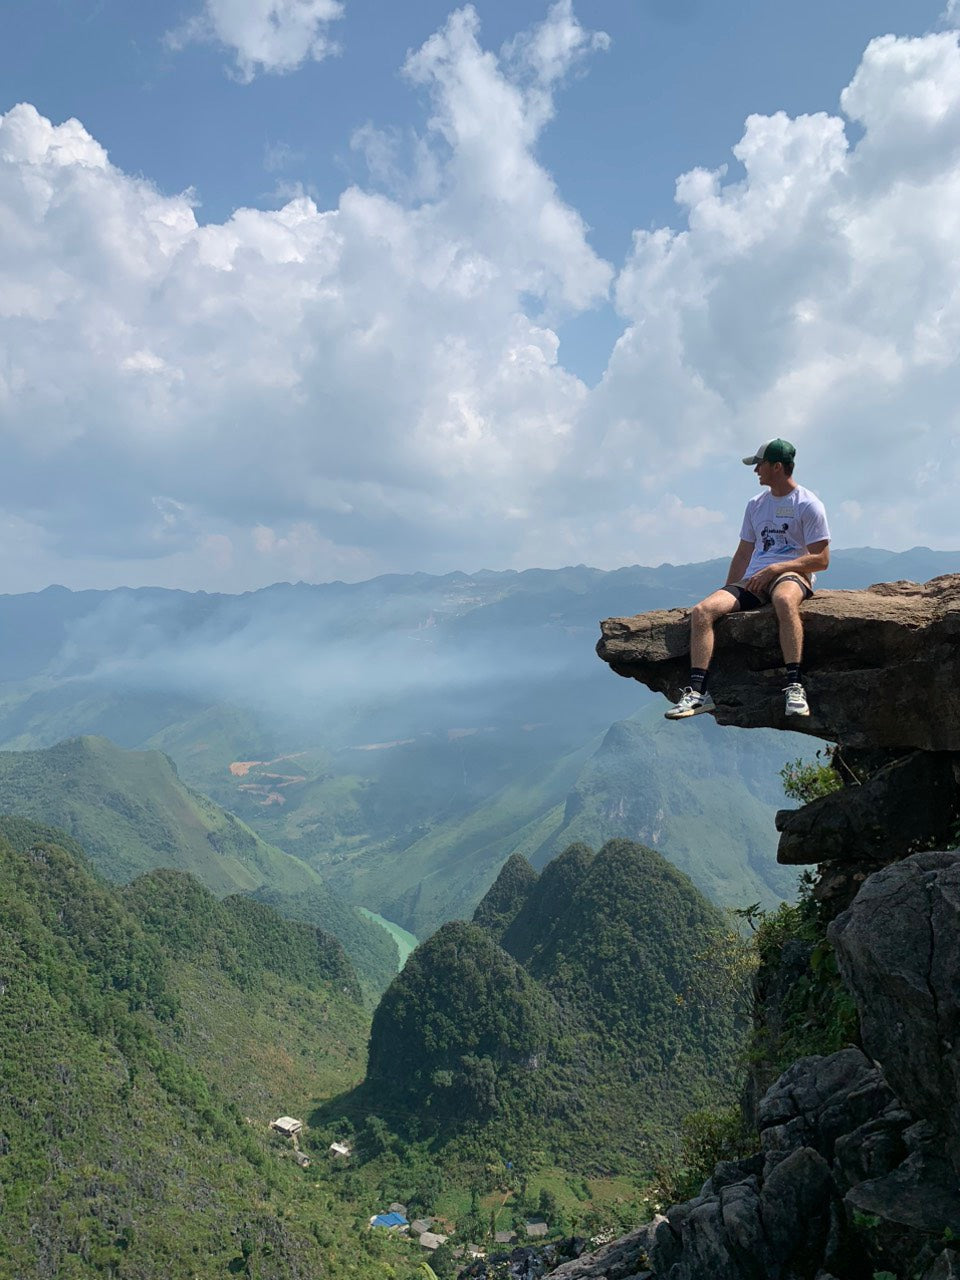 HGC2: Ha Giang Loop, 3 Days 2 Nights (Ride Pillion With A Friend)